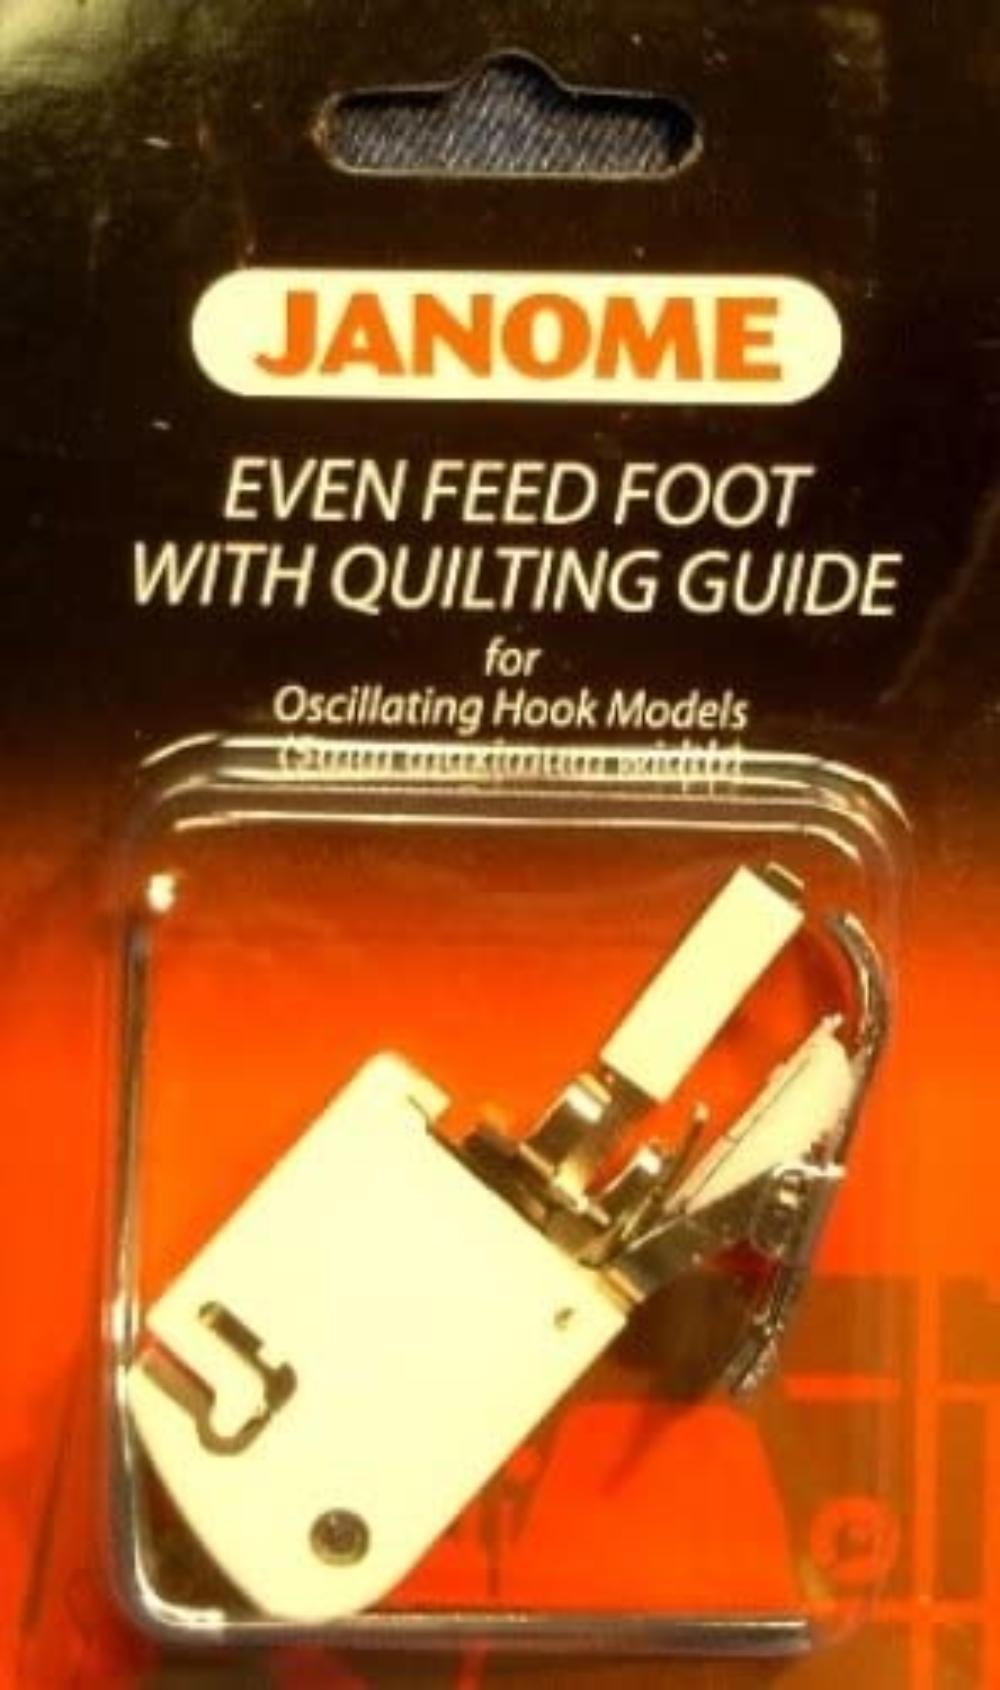 Janome Even Feed Foot with Quilting Guide Oscillating Hook Models for Low-Shank Sewing Machines 